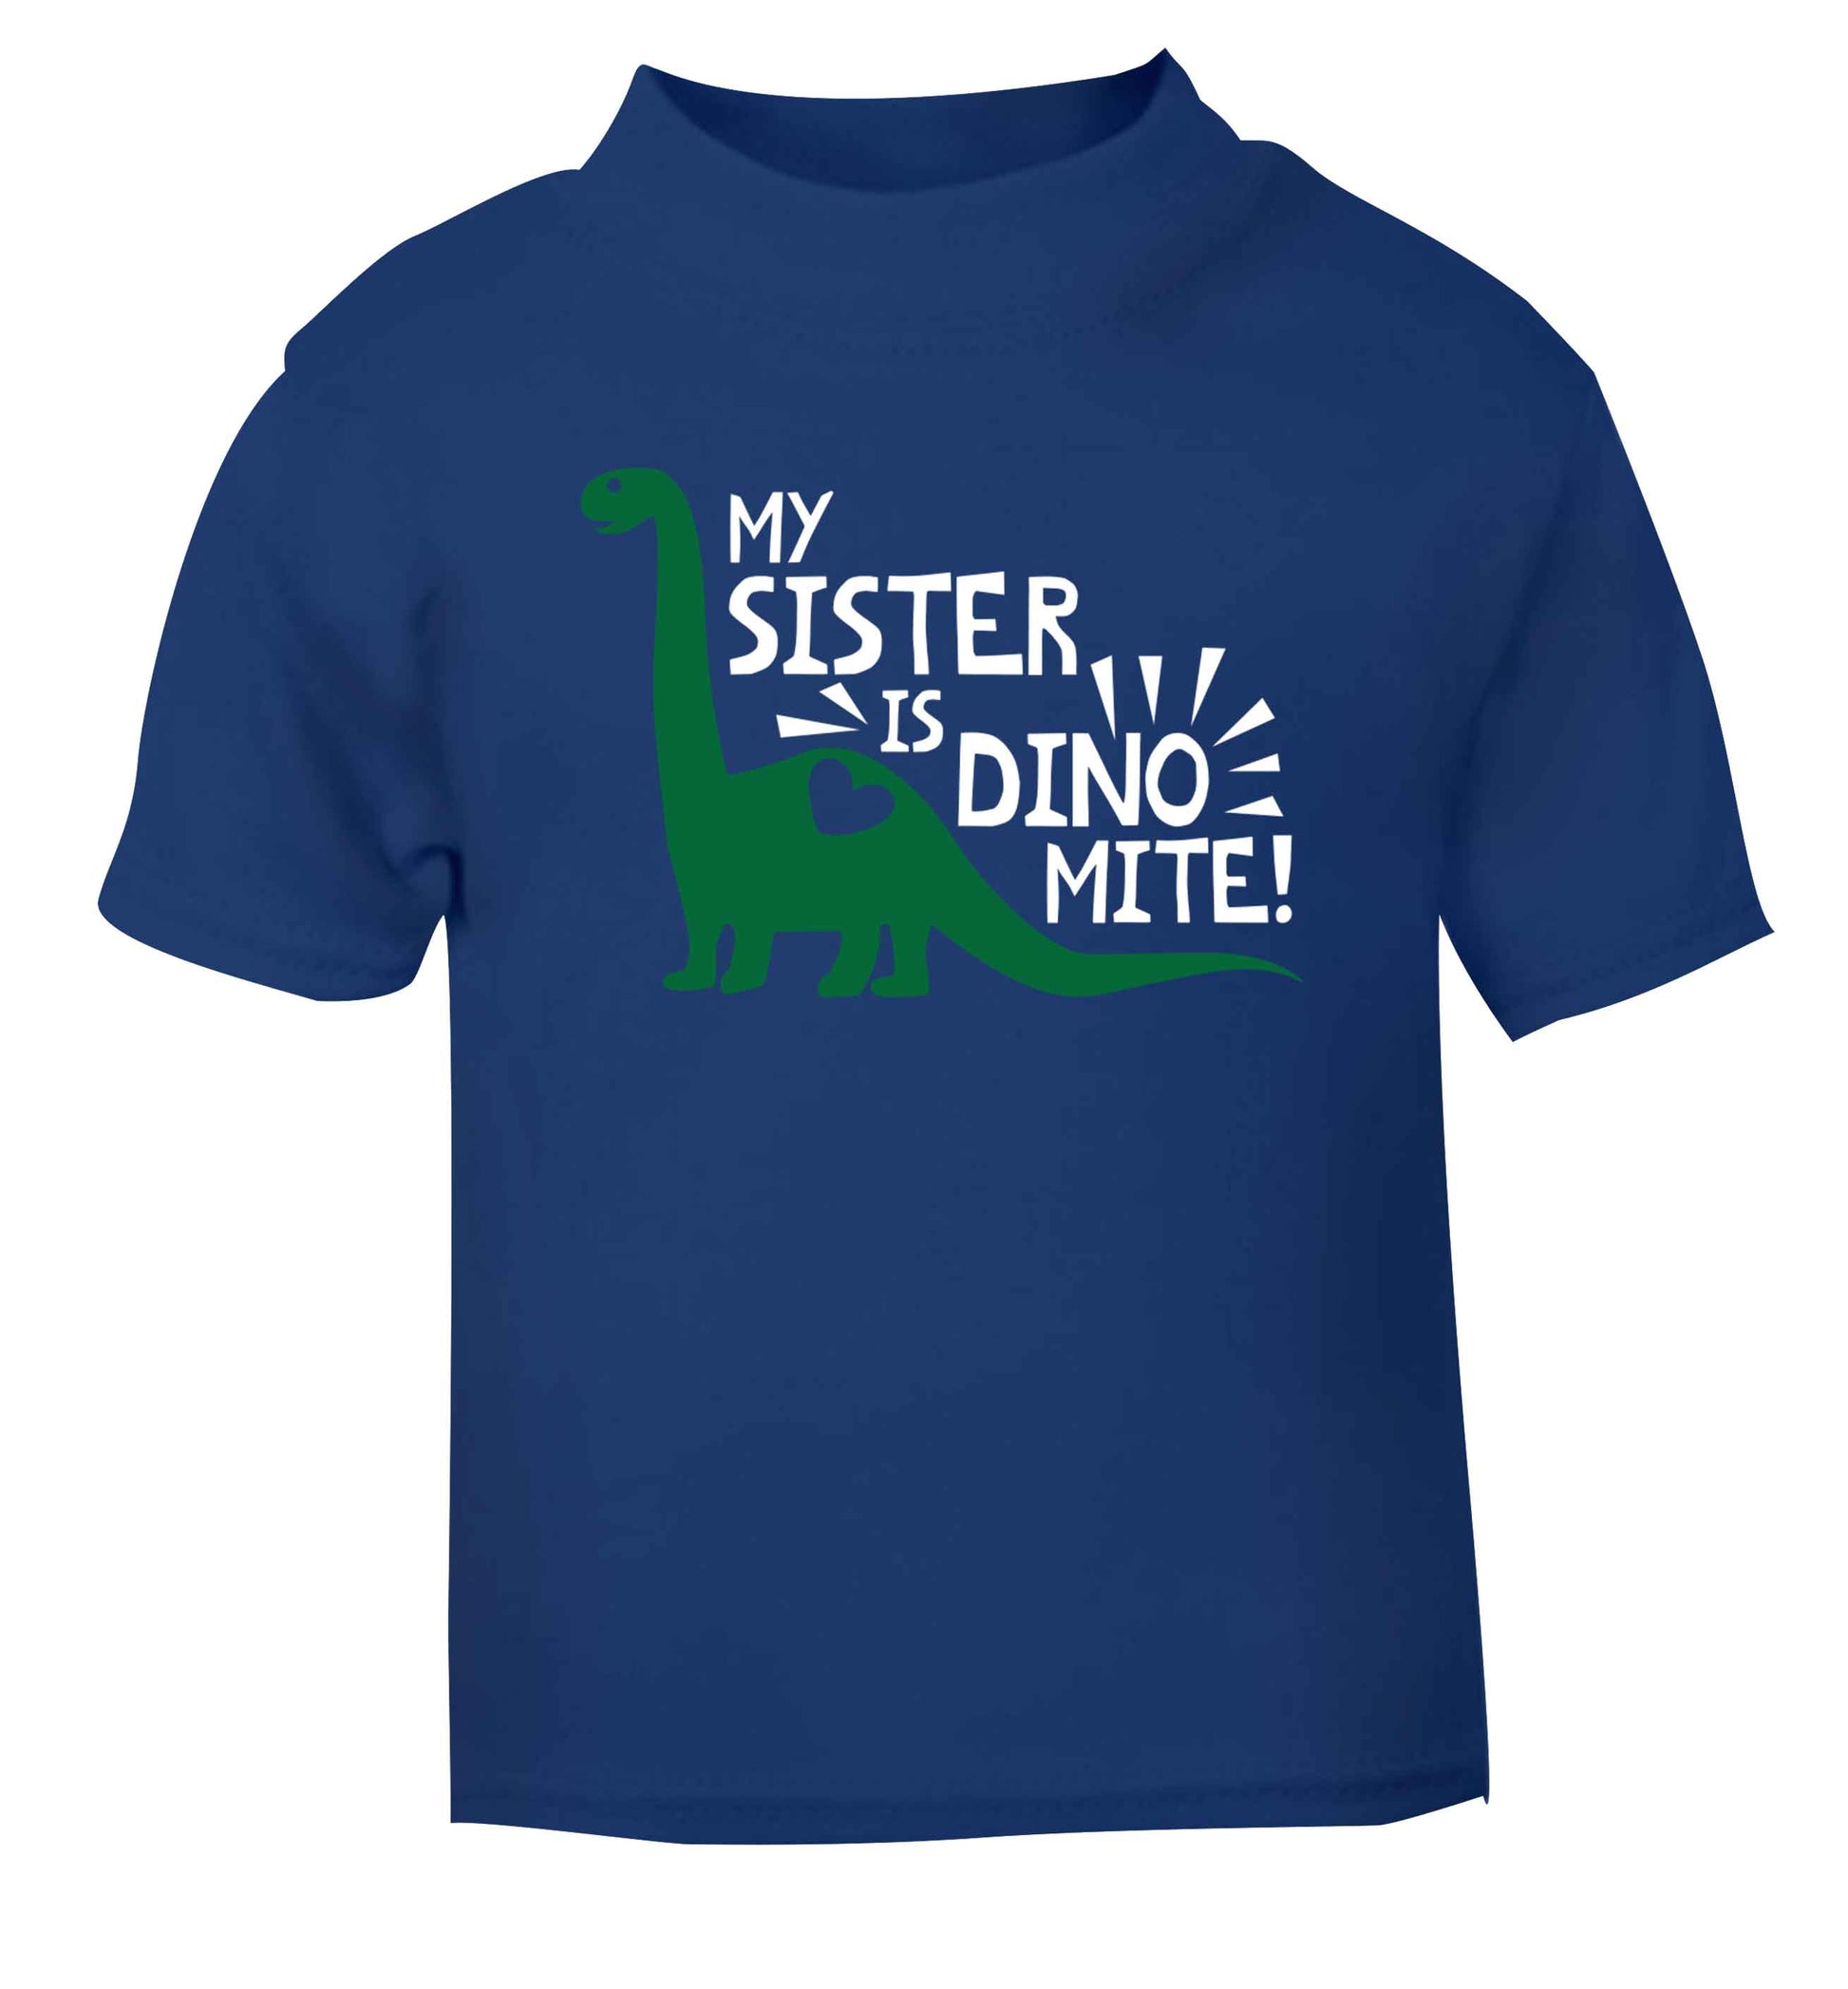 My sister is dinomite! blue Baby Toddler Tshirt 2 Years